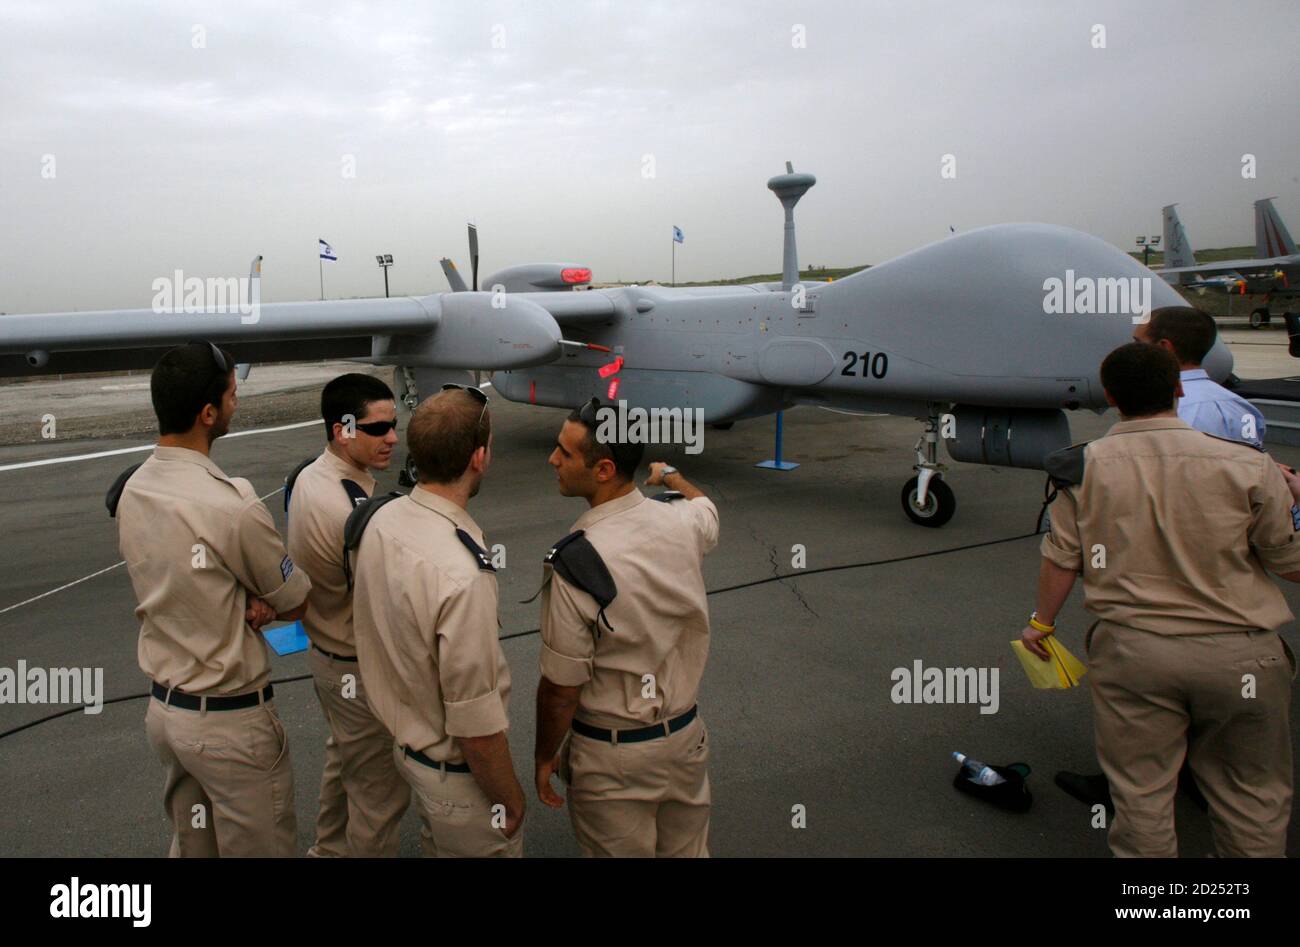 Israeli soldiers look at an IAI Eitan, also known as the Heron TP, surveillance unmanned air vehicle (UAV) on display at Tel Nof Air Force Base near Tel Aviv February 21, 2010. An Israeli air force officer said the Israeli-made drone is larger than any other drone and can fly at higher altitudes, while carrying more weight including advanced technological systems. The officer said the drone's main advantage was its longer flying time, estimated at 20 hours. REUTERS/Gil Cohen Magen (ISRAEL - Tags: TRANSPORT MILITARY) Stock Photo